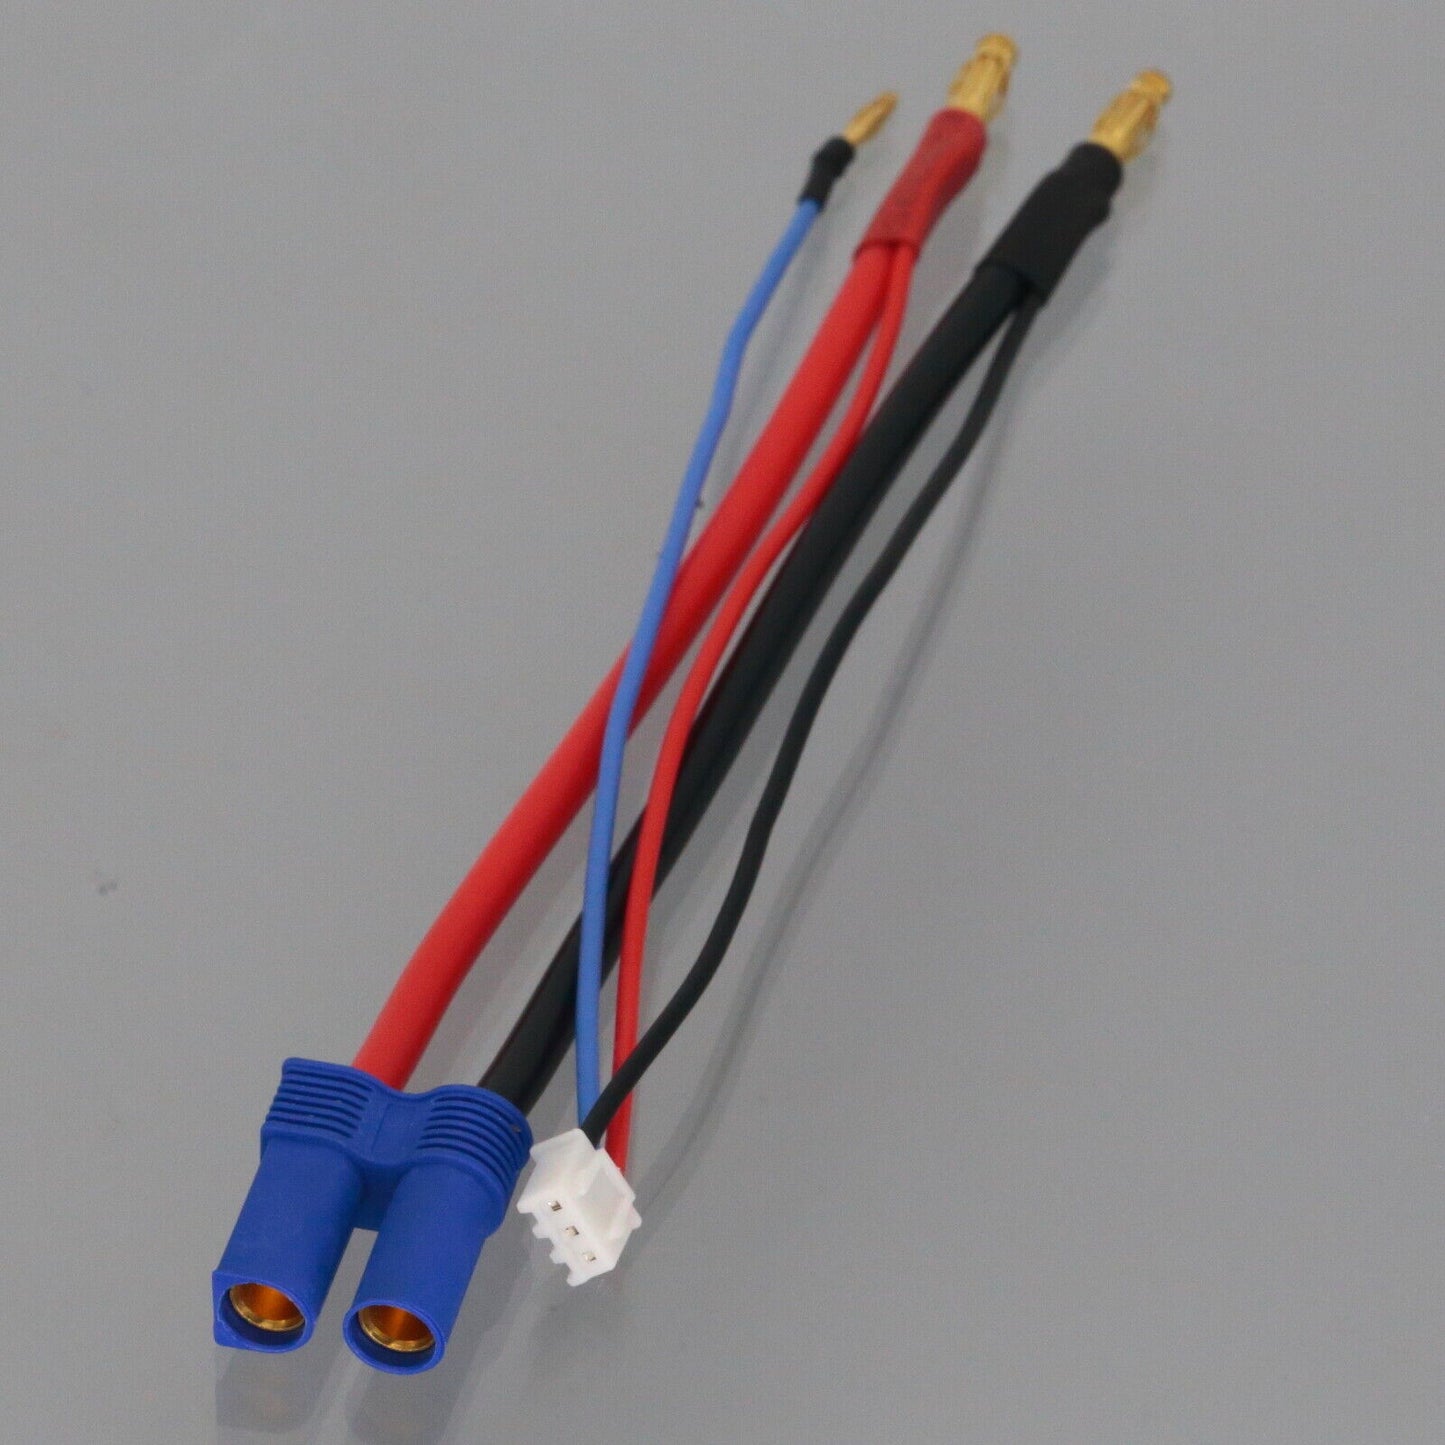 EC5 Female Connector to 4MM 4.0MM Banana Plug Bullet Connector with 2S Lipo JST-XH Balance Plug Wire